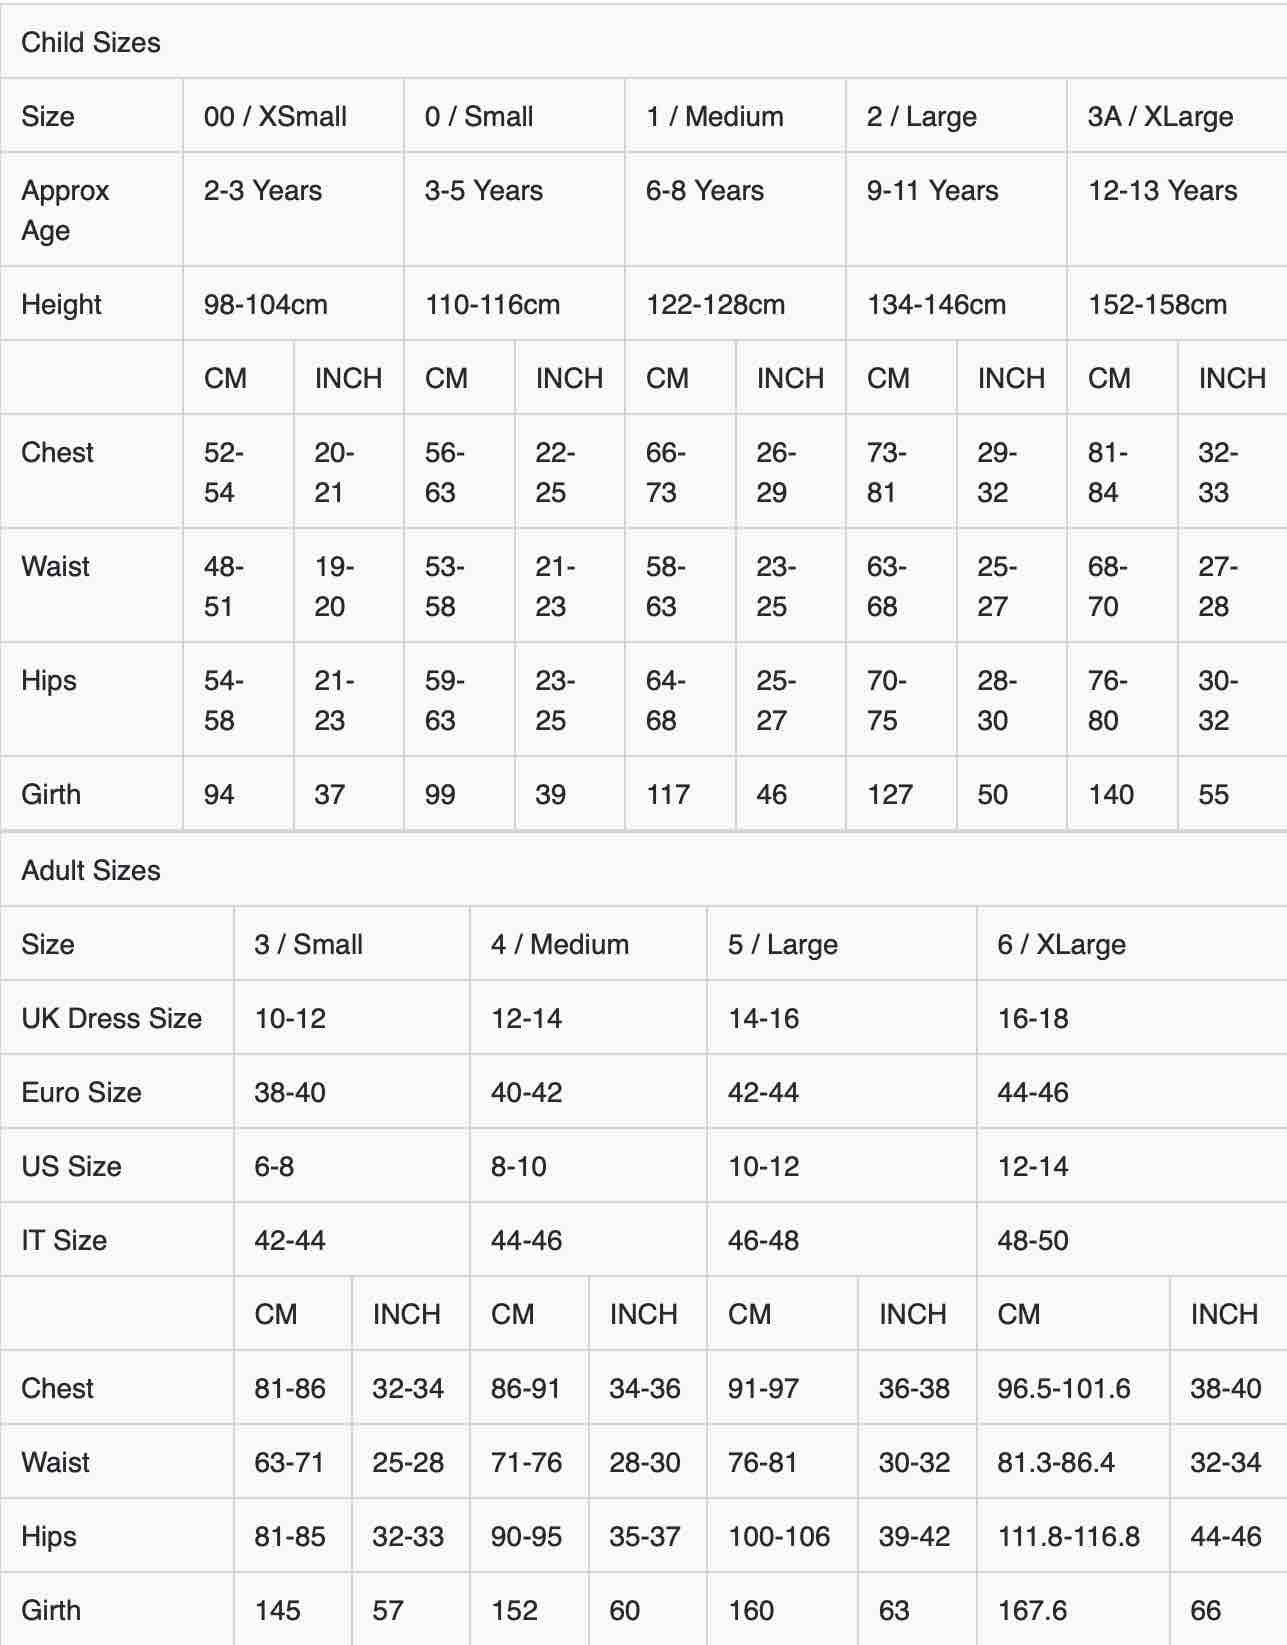 Ballet Shoe Size Chart Abcd | vlr.eng.br